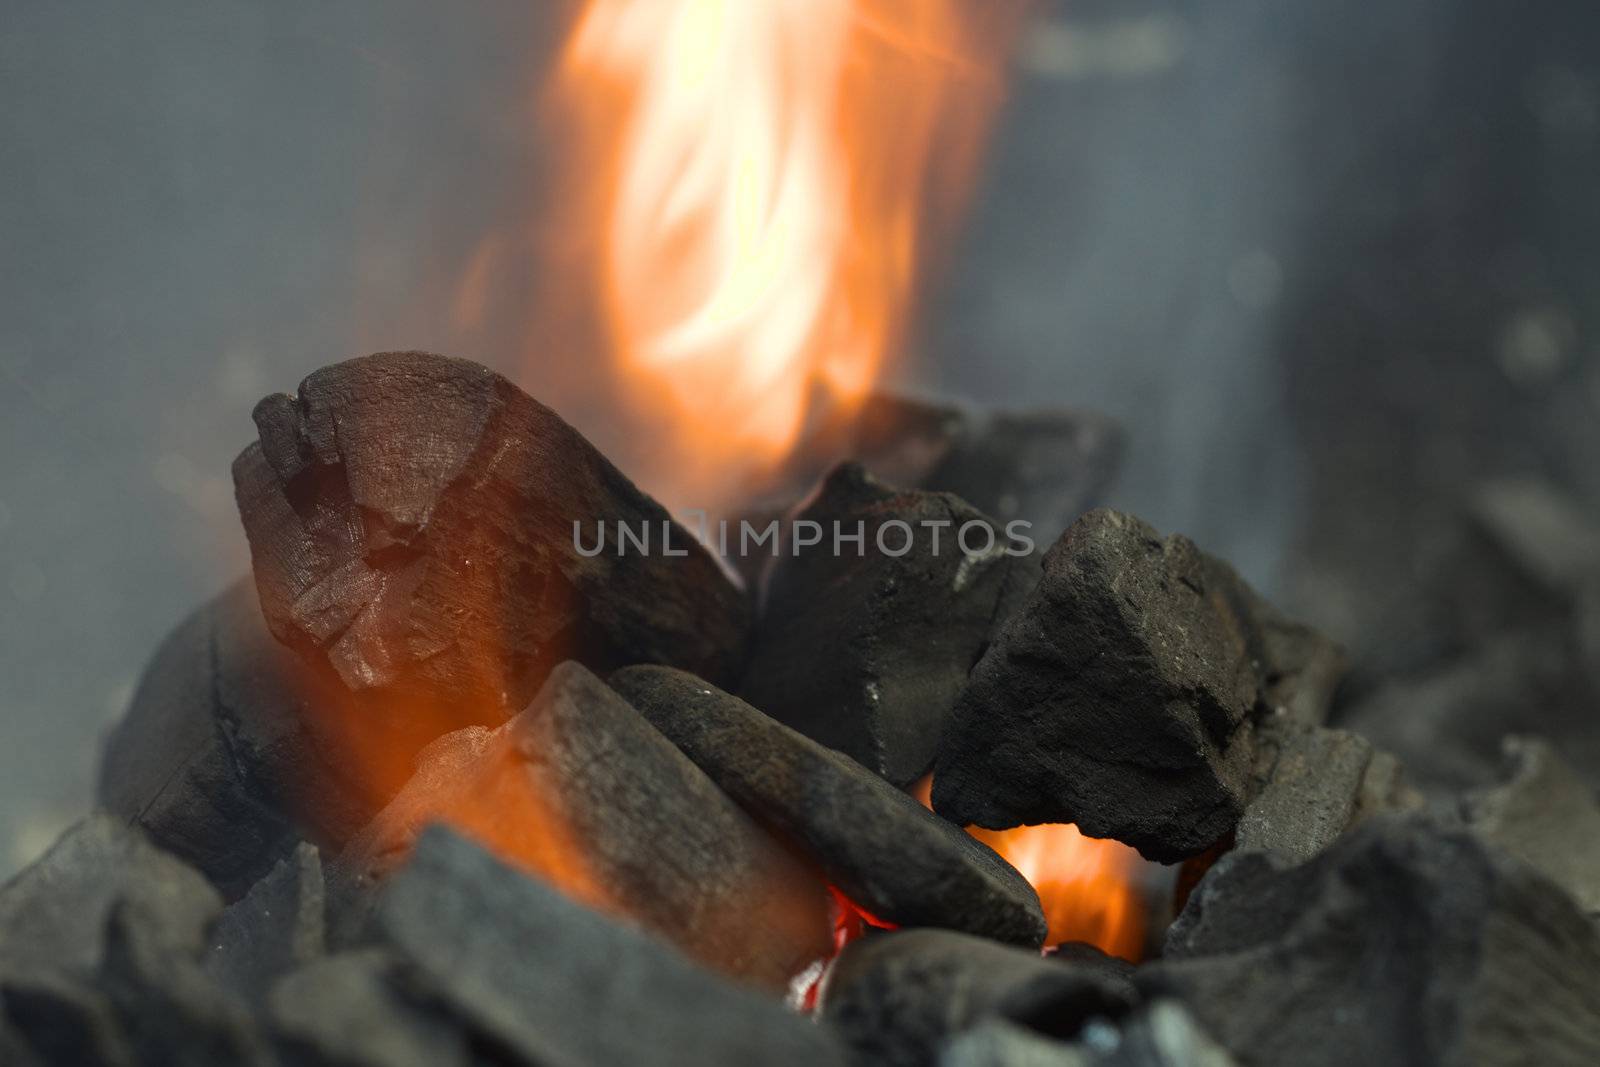 Burning charcoal with orange-colored flame and smoke (Selective Focus, Focus on the front of the big charcoal piece on the left side of the flame)